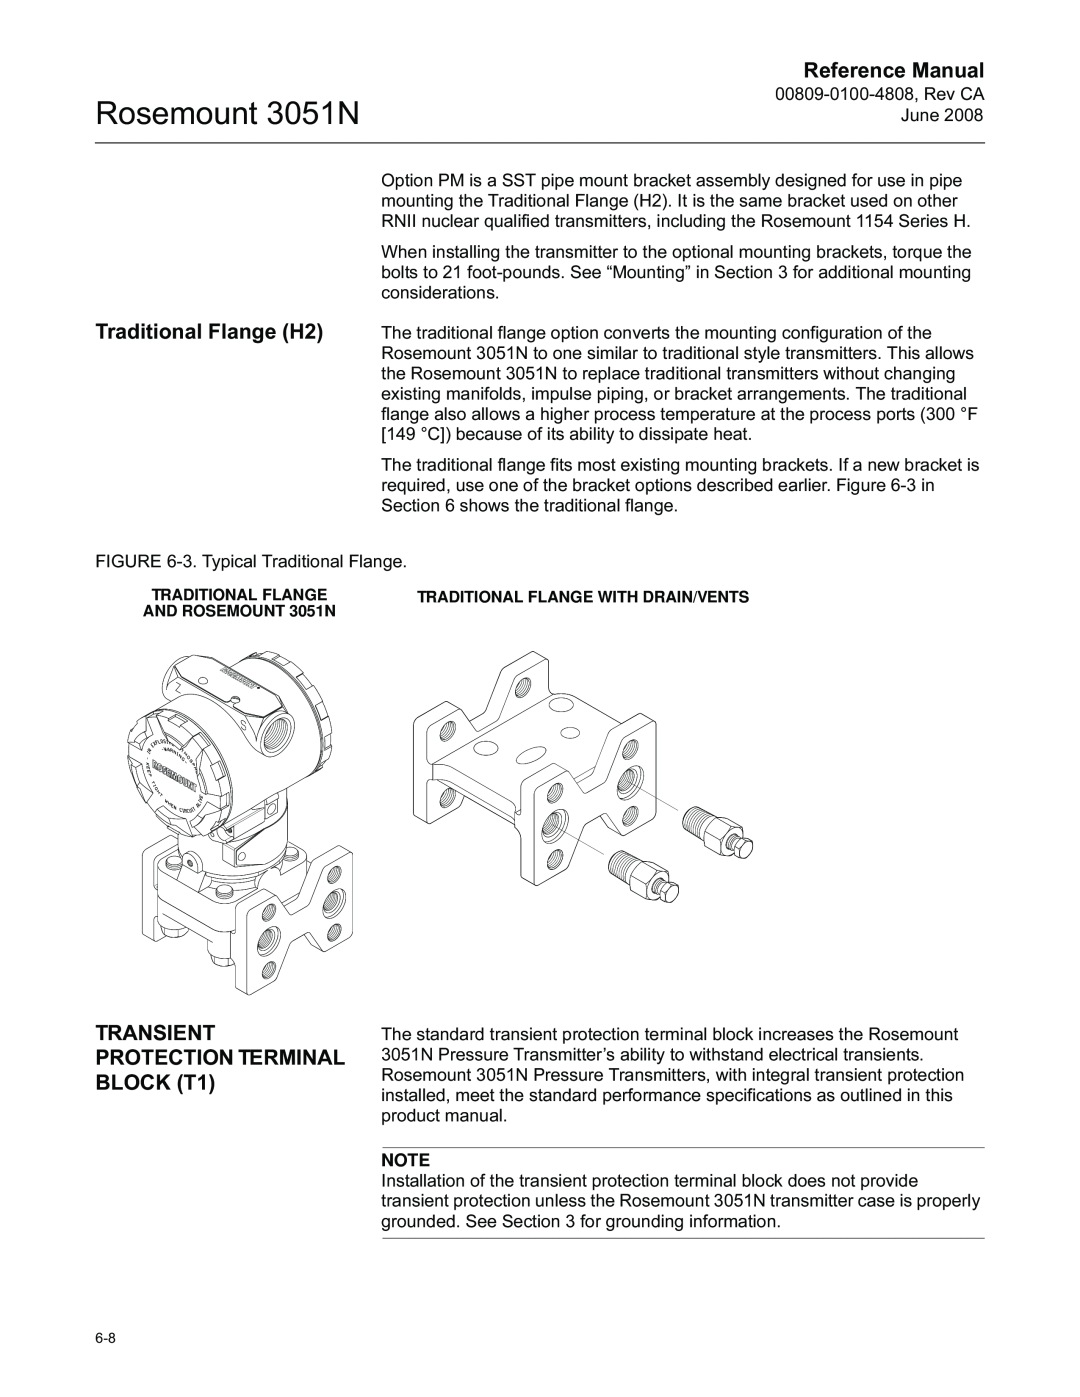 Emerson manual Traditional Flange H2, TRANSIENT PROTECTION TERMINAL BLOCK T1, Rosemount 3051N, Reference Manual 